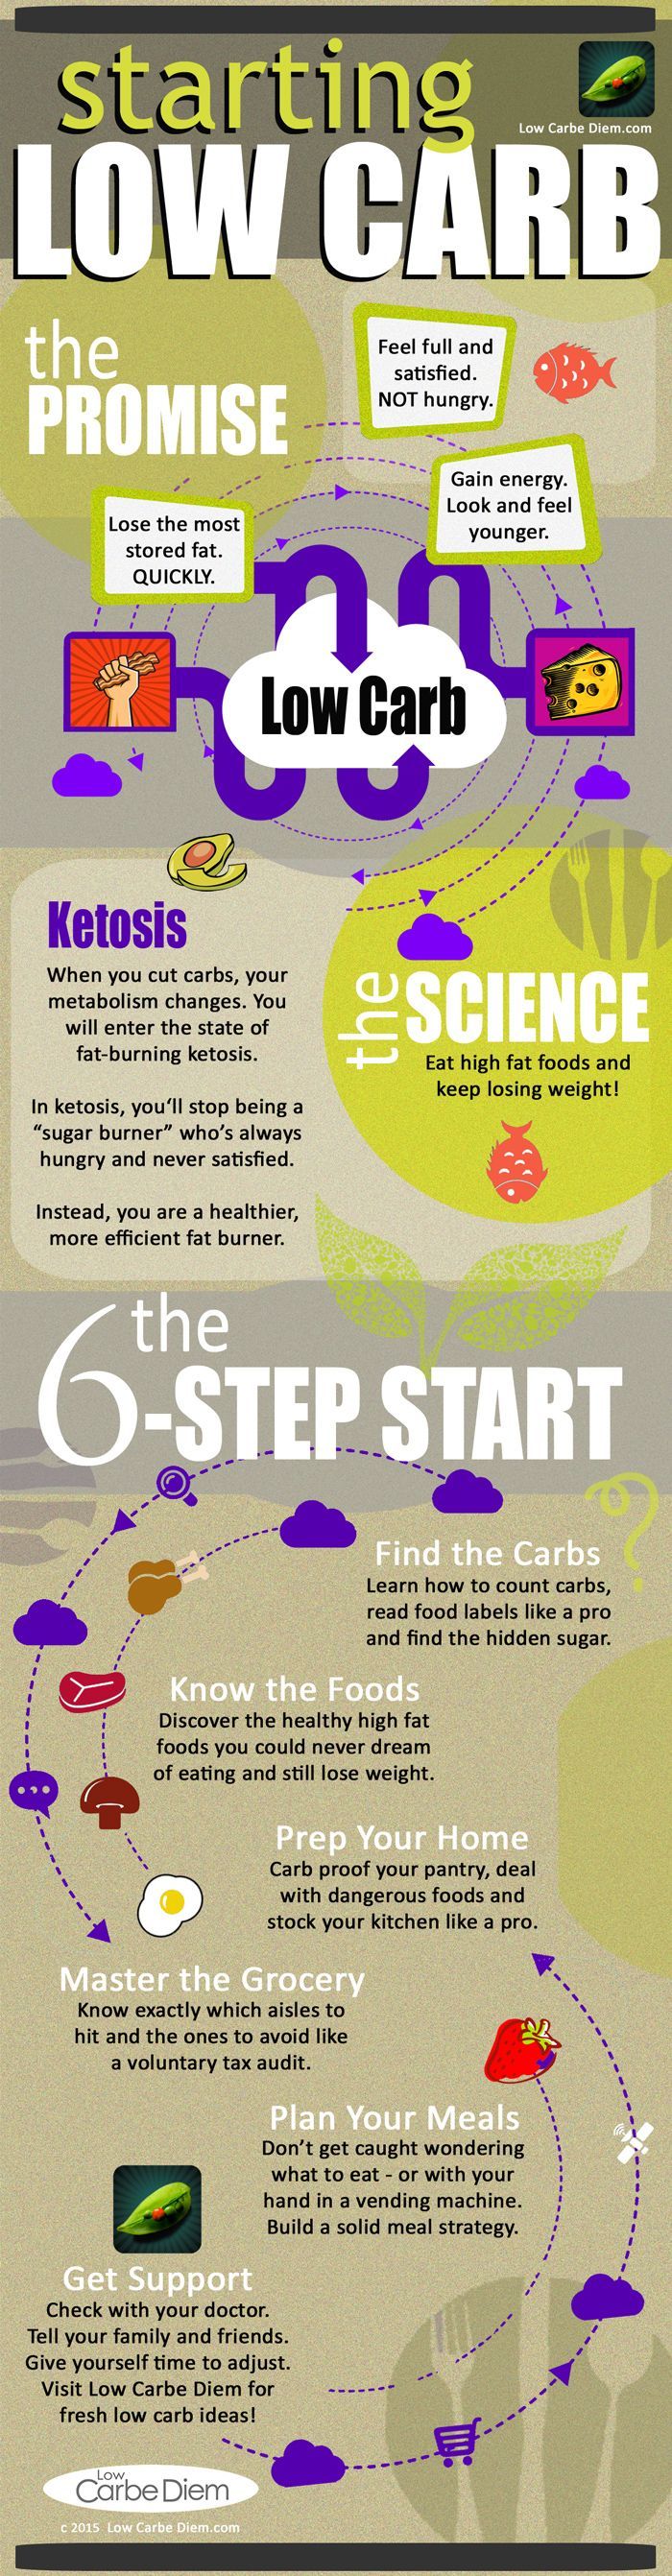 Low Carb Infographic. How to start a low carb diet: The Promises. The Science. The Simple 6-Step Start.